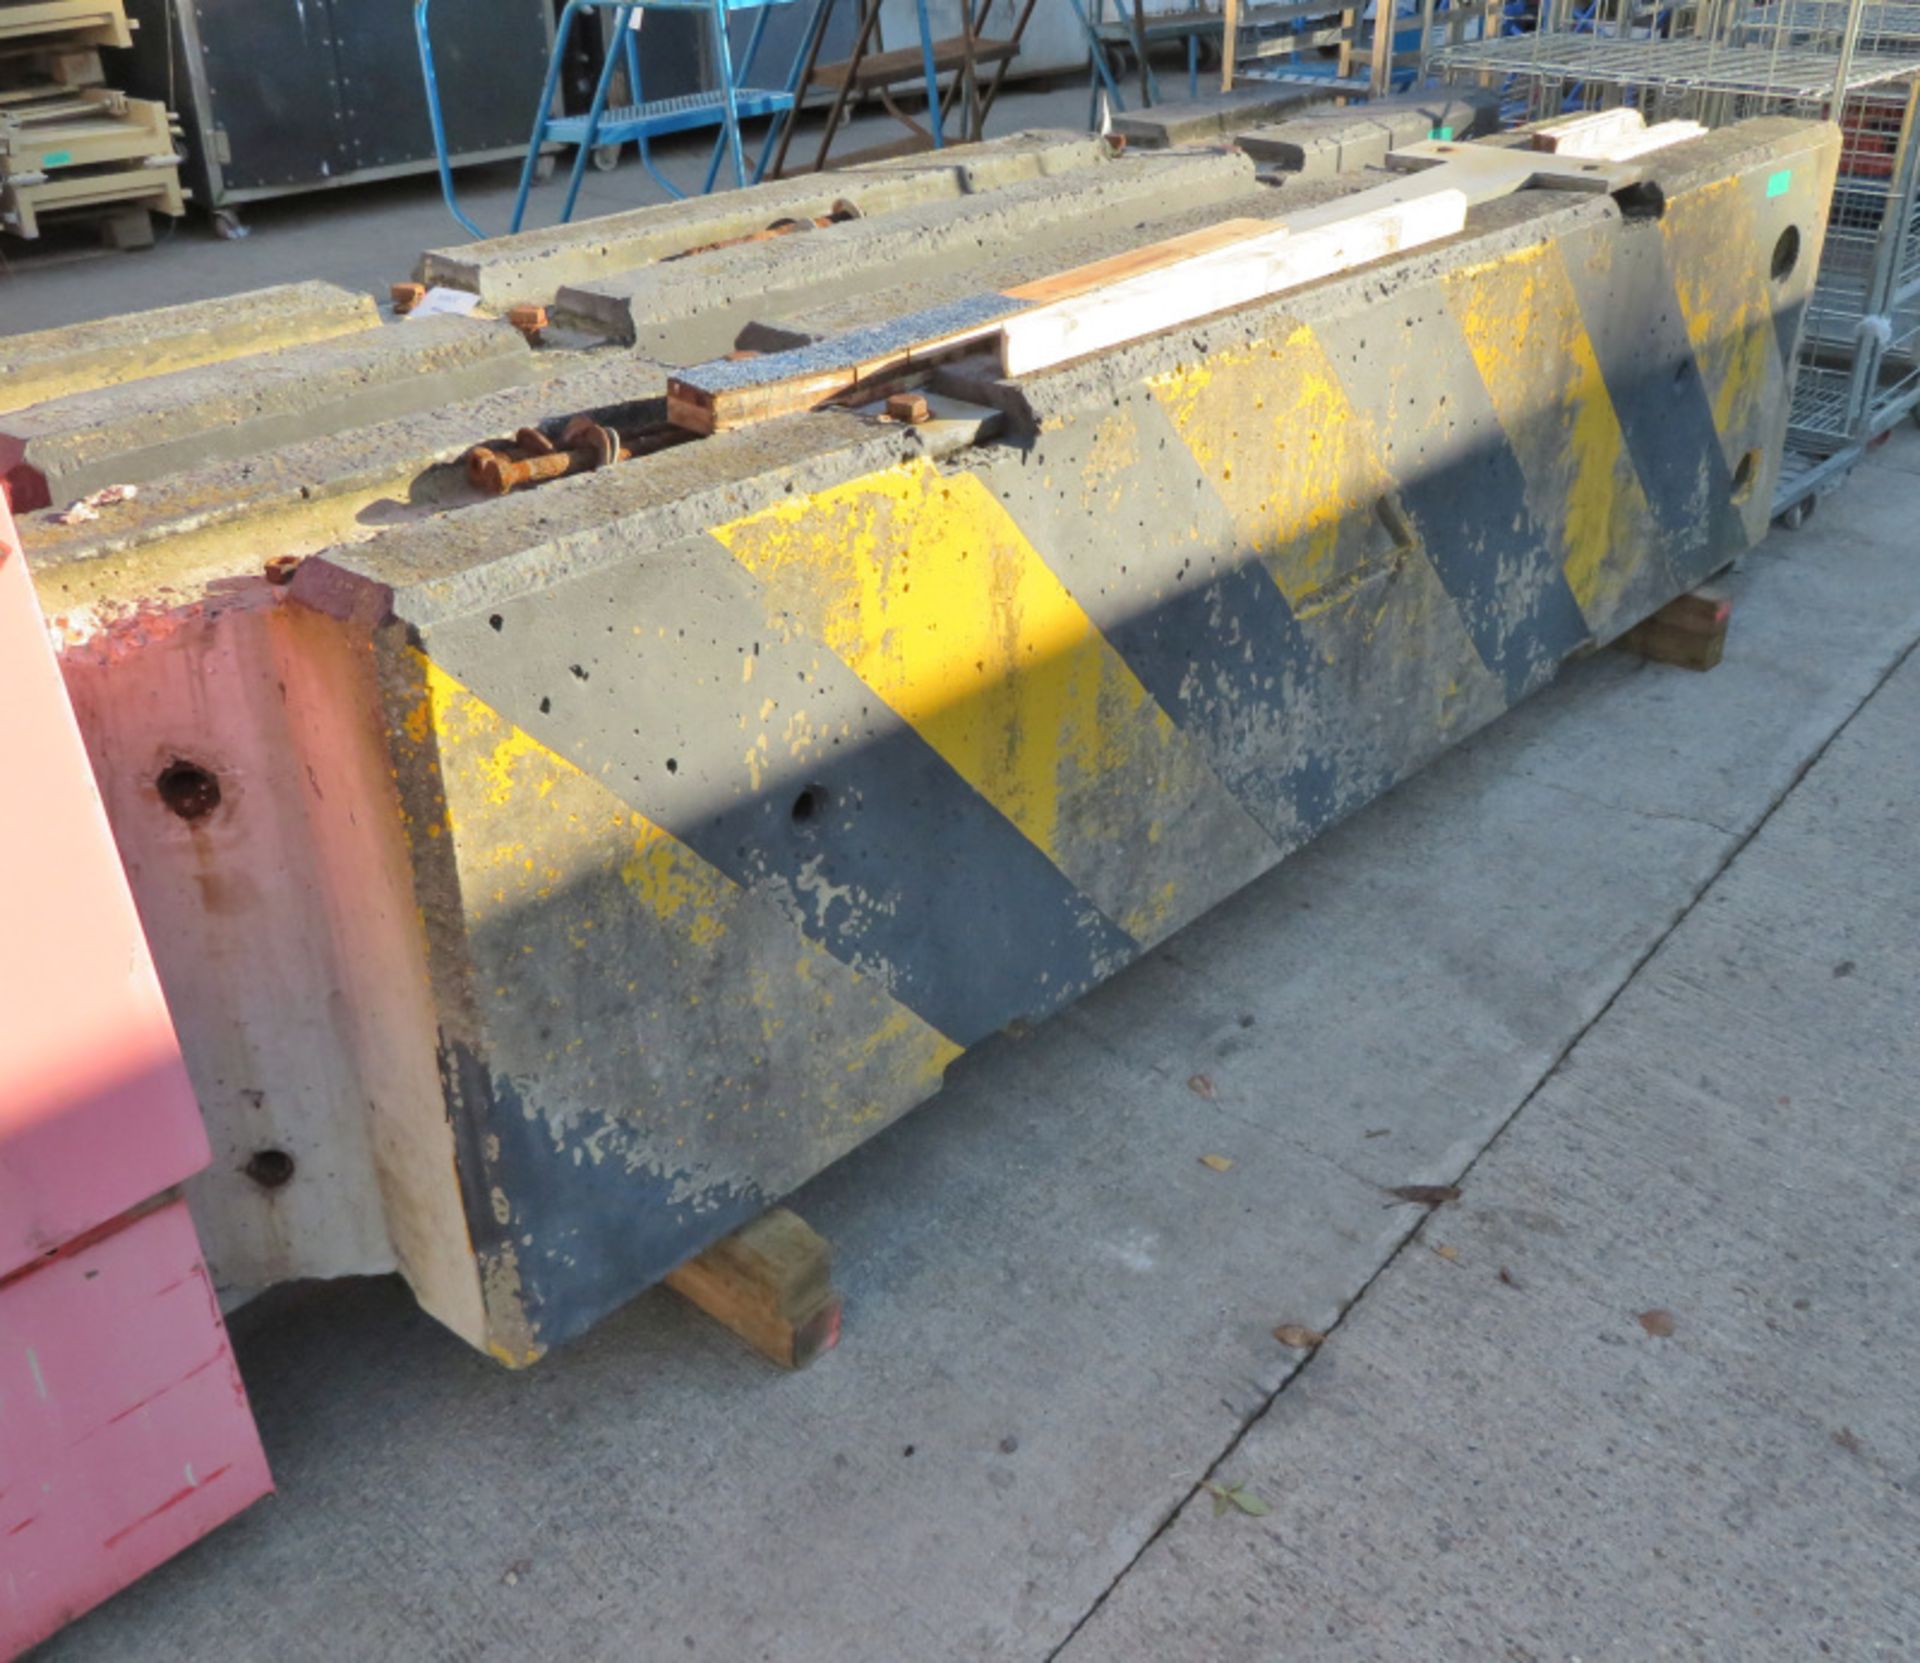 TVCB Concrete barrier - 3000mm x 450mm x 800mm - weight 2500kg - Image 2 of 2